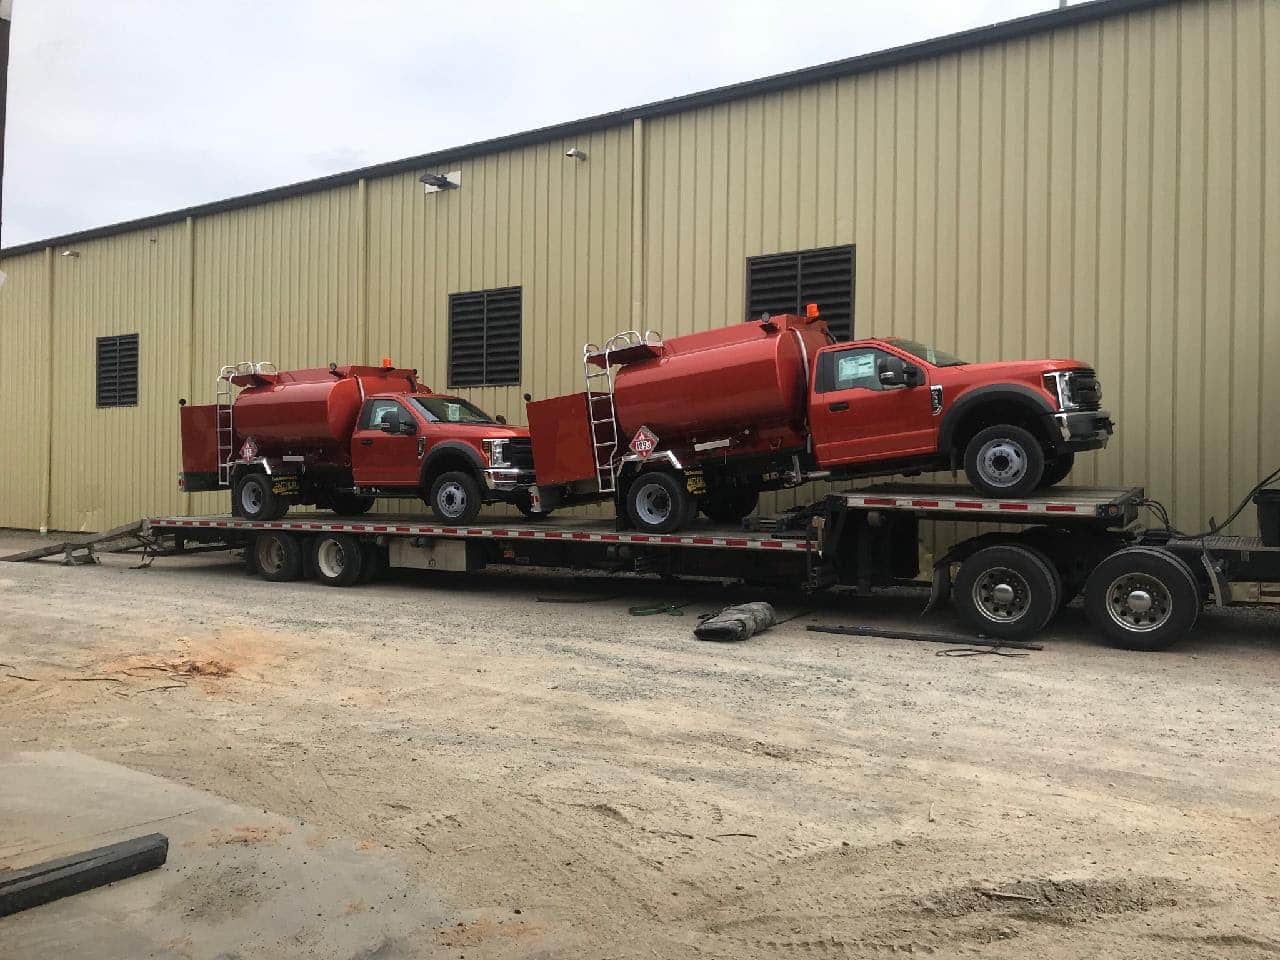 Two Ford F-550 Fuel Trucks loaded on a step deck trailer for transport